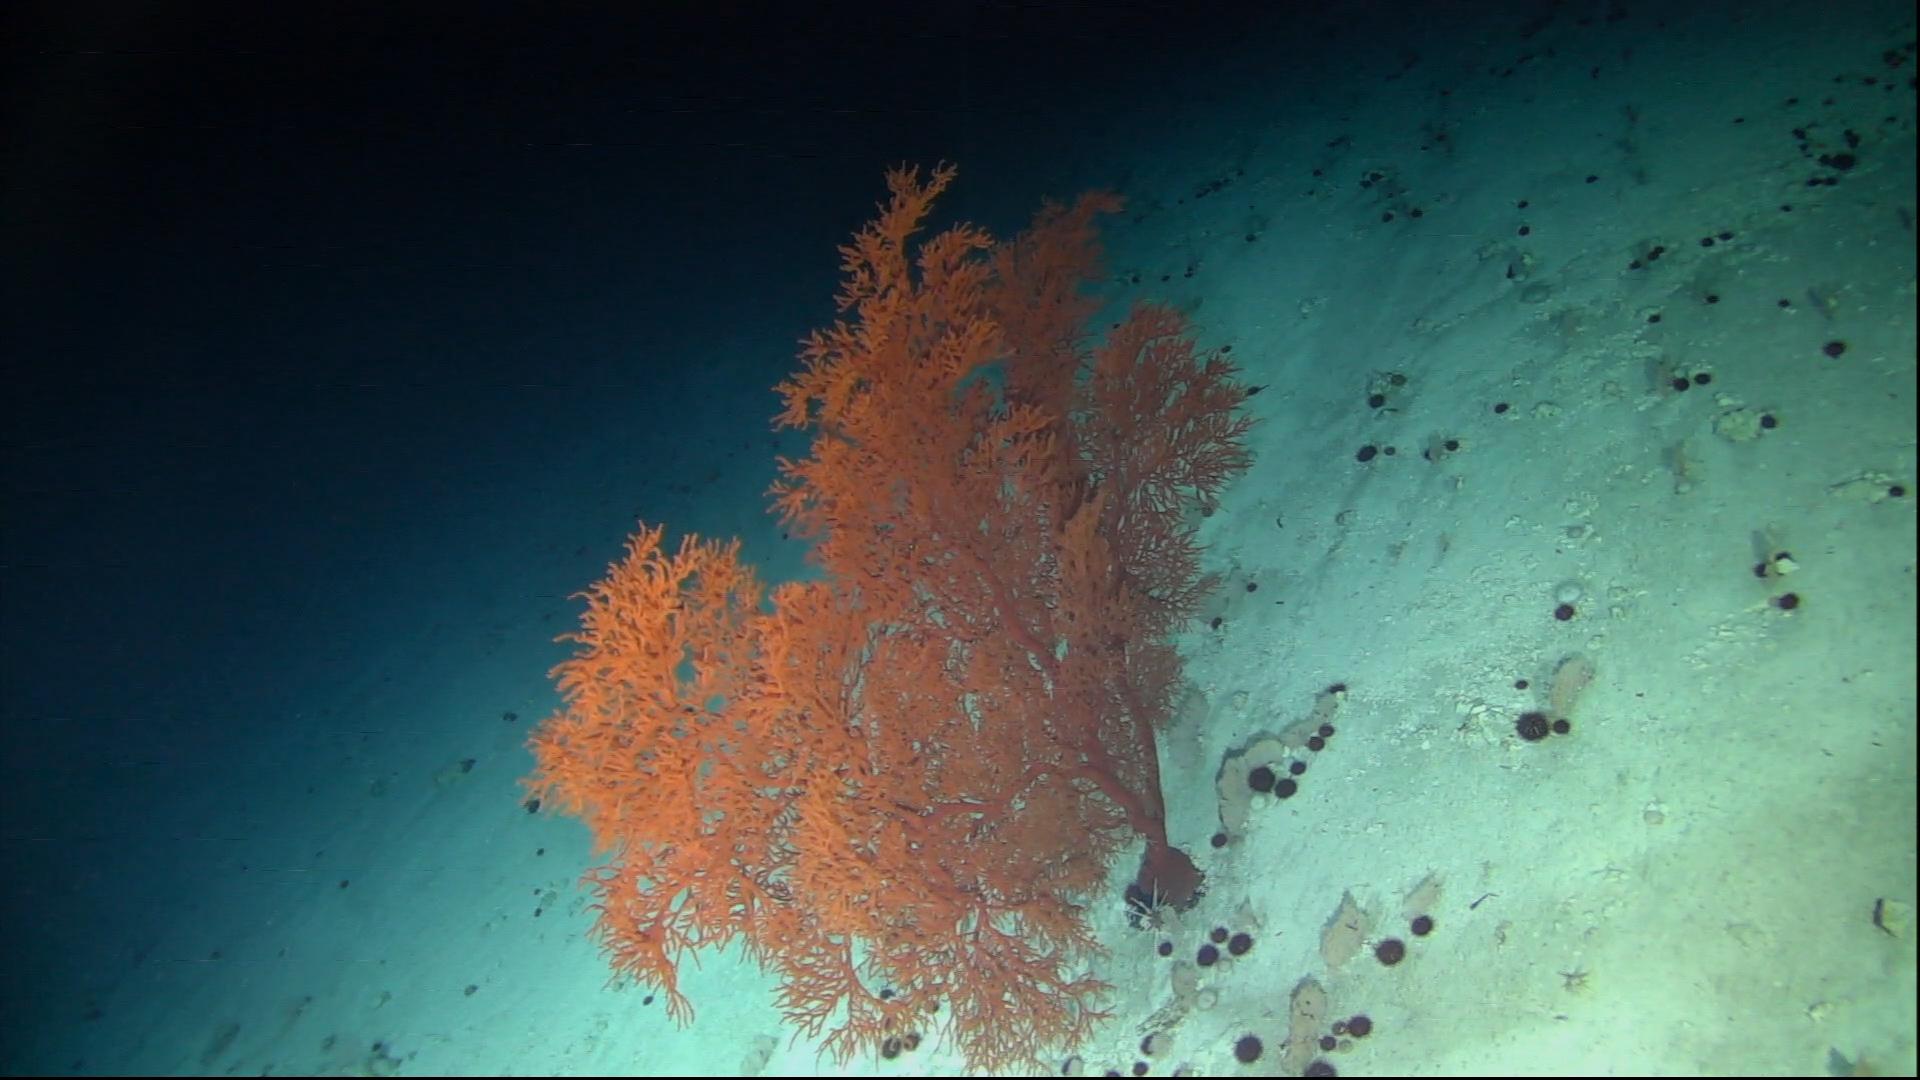 EM 3 Subsea footage from a bowtech camera 2